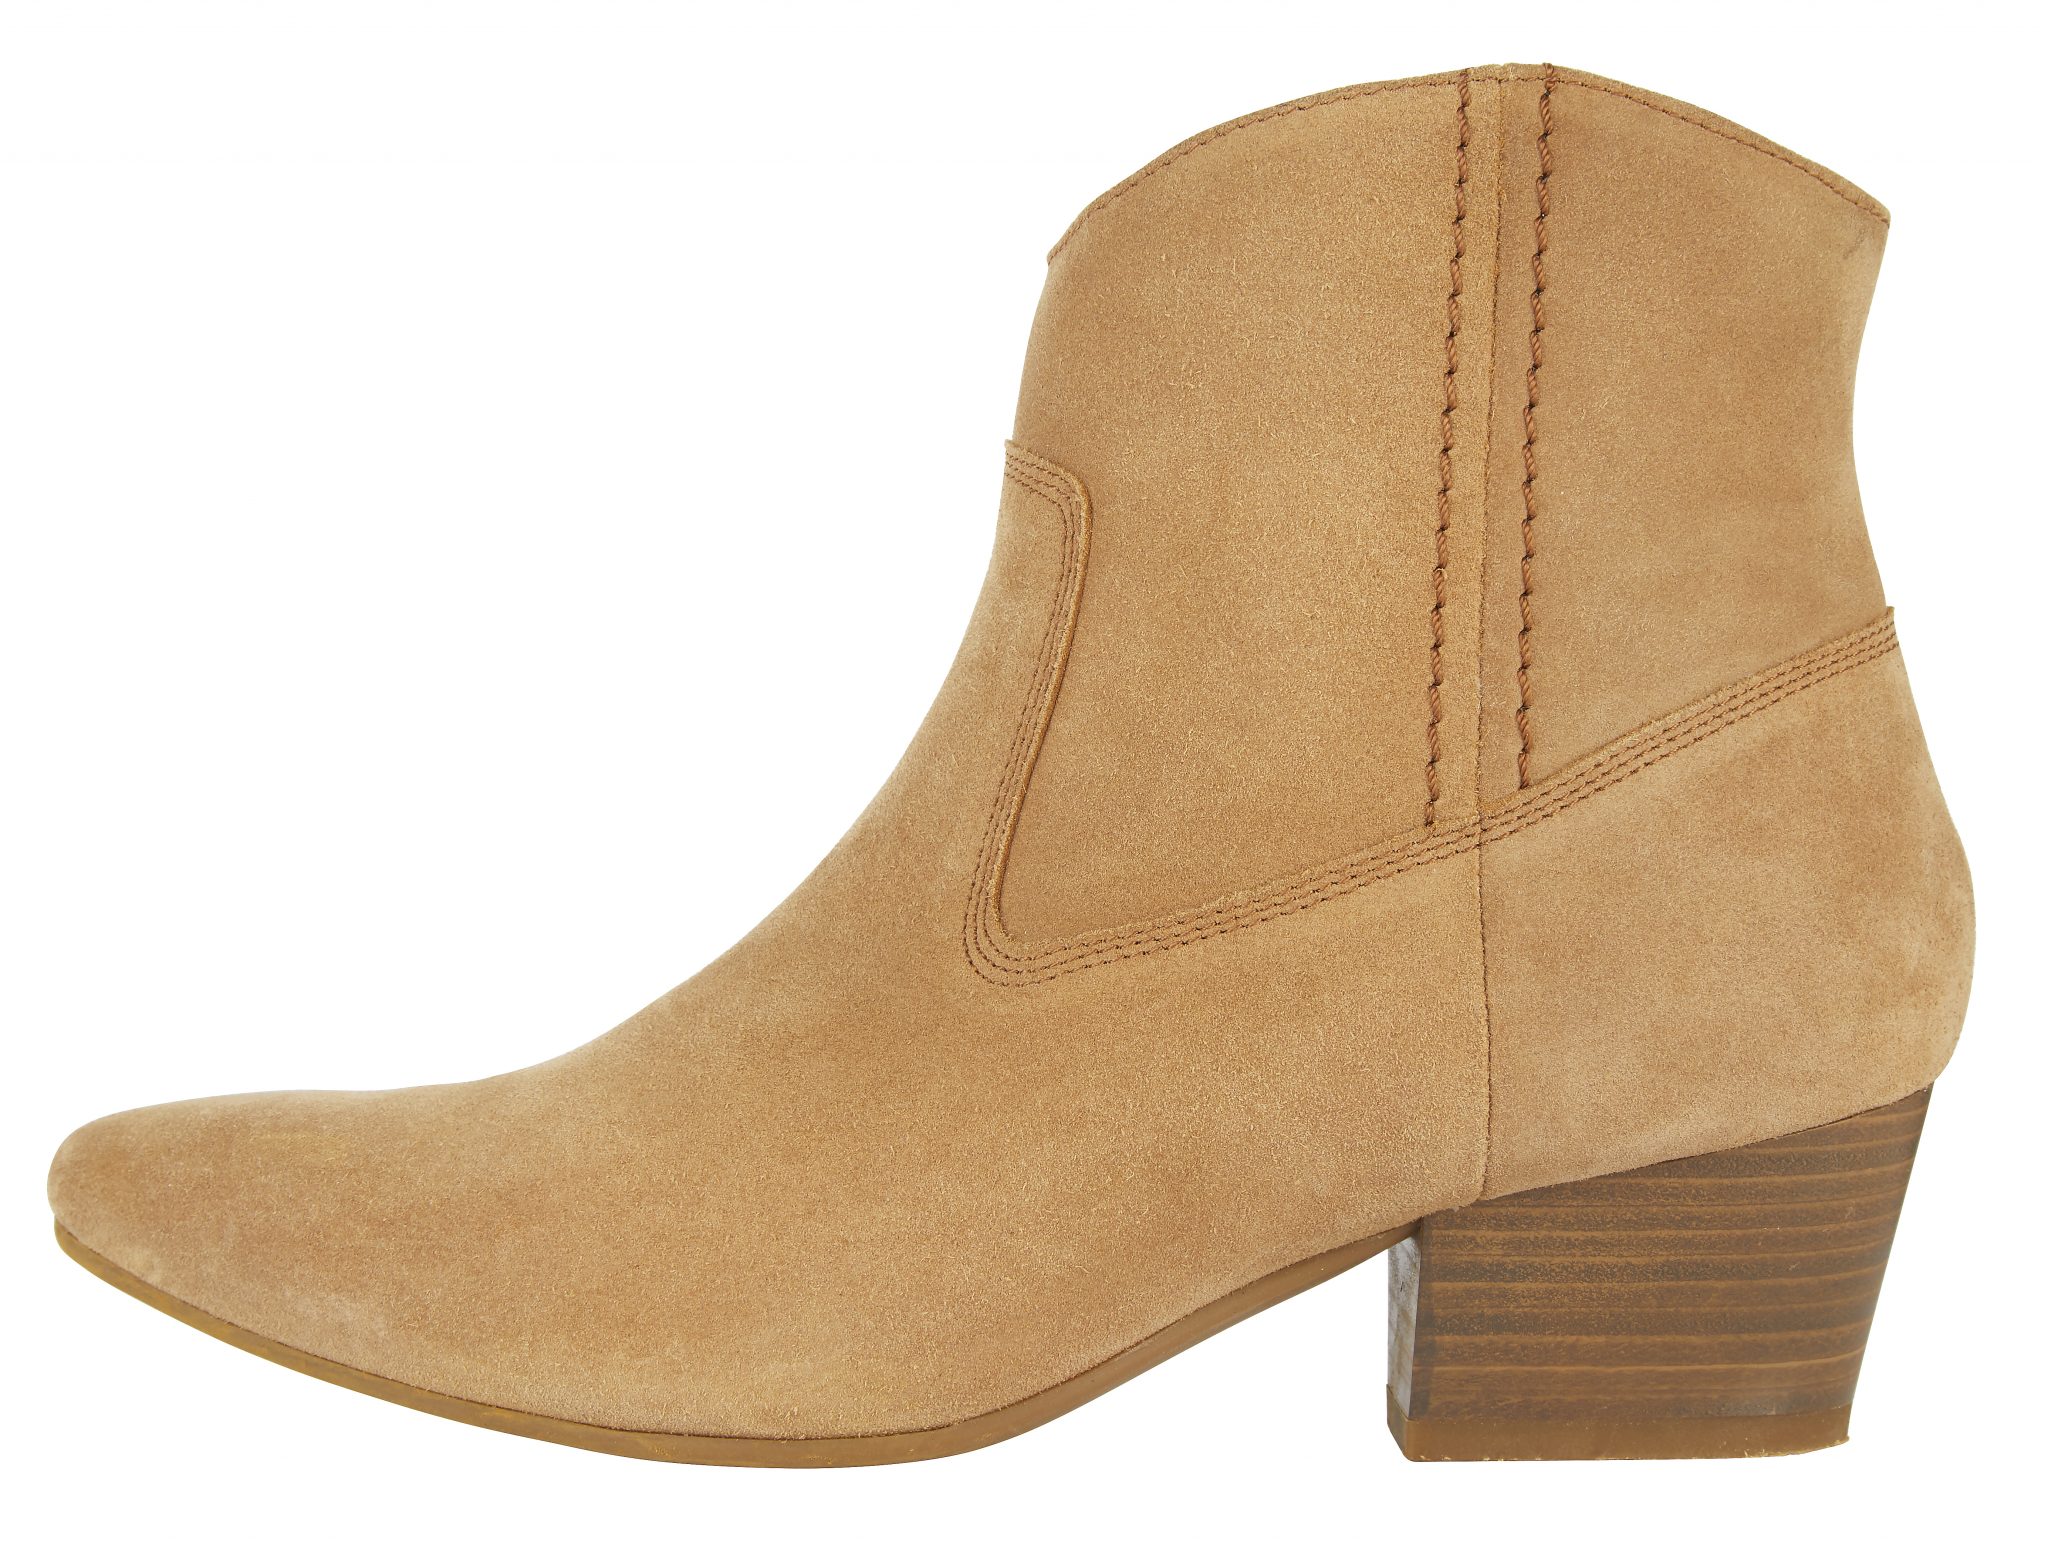 m&s suede ankle boots